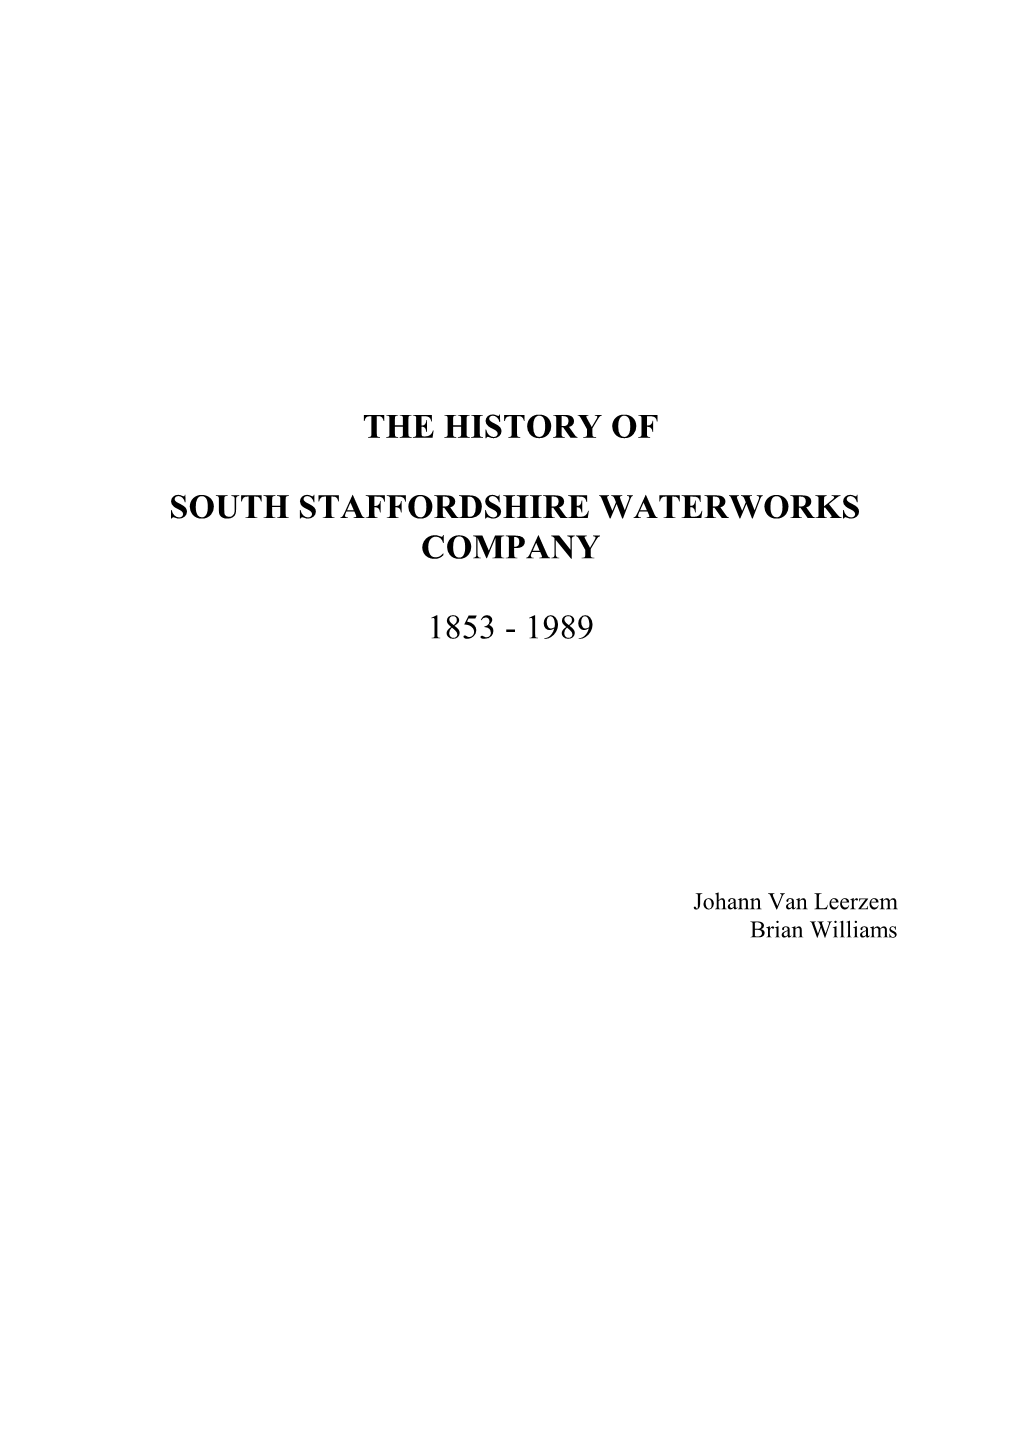 The History of South Staffordshire Waterworks